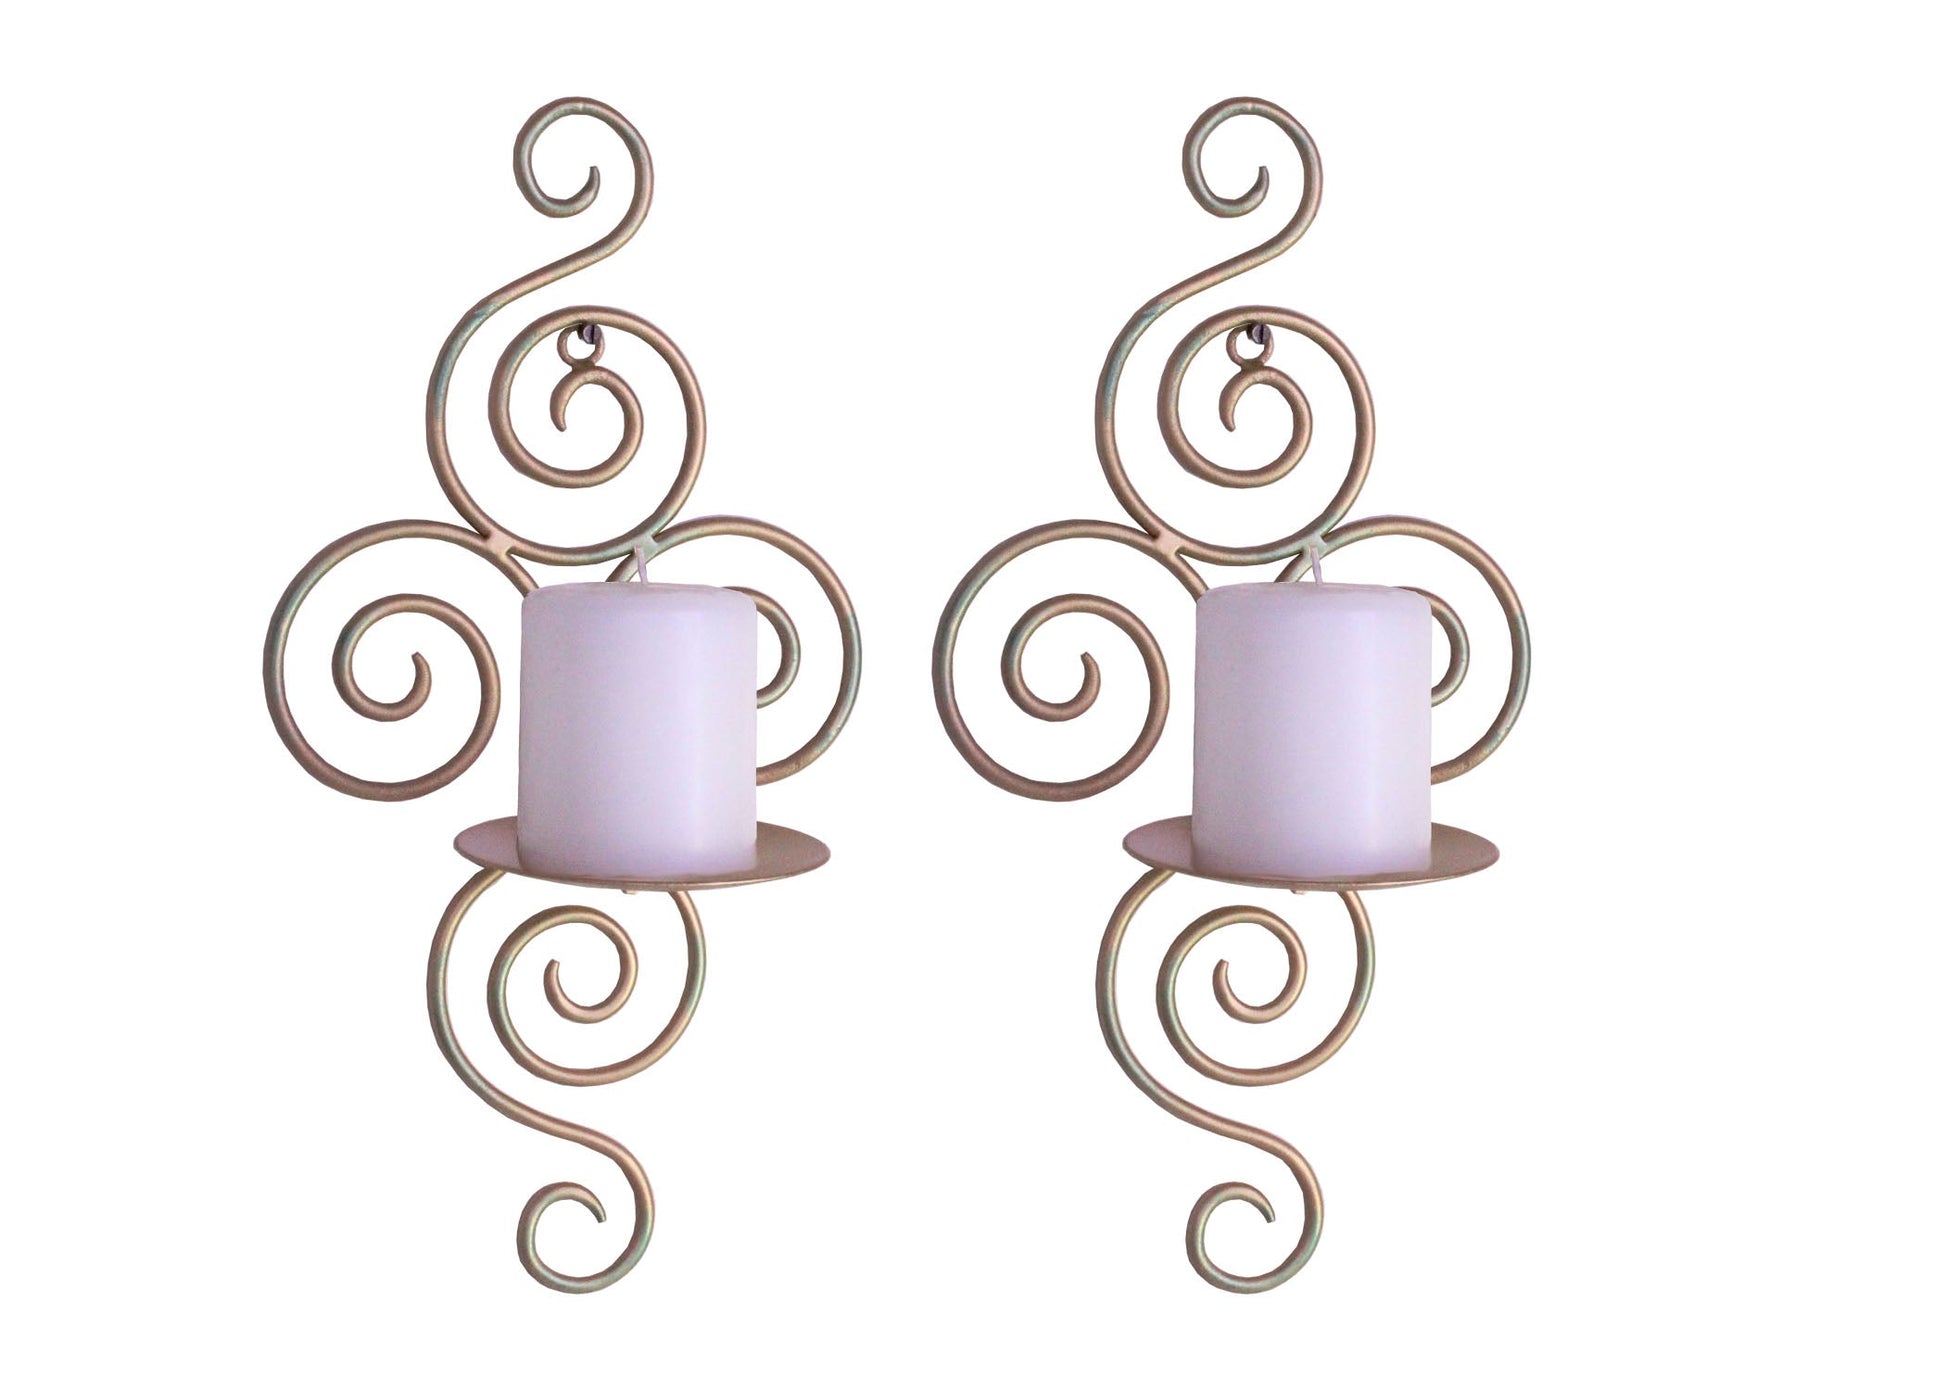 Hosley® Wall Candle Scone, Set of 2 Elegant Swirling Iron Hanging Wall Mounted Decorative Candle Holder For Home Decoration